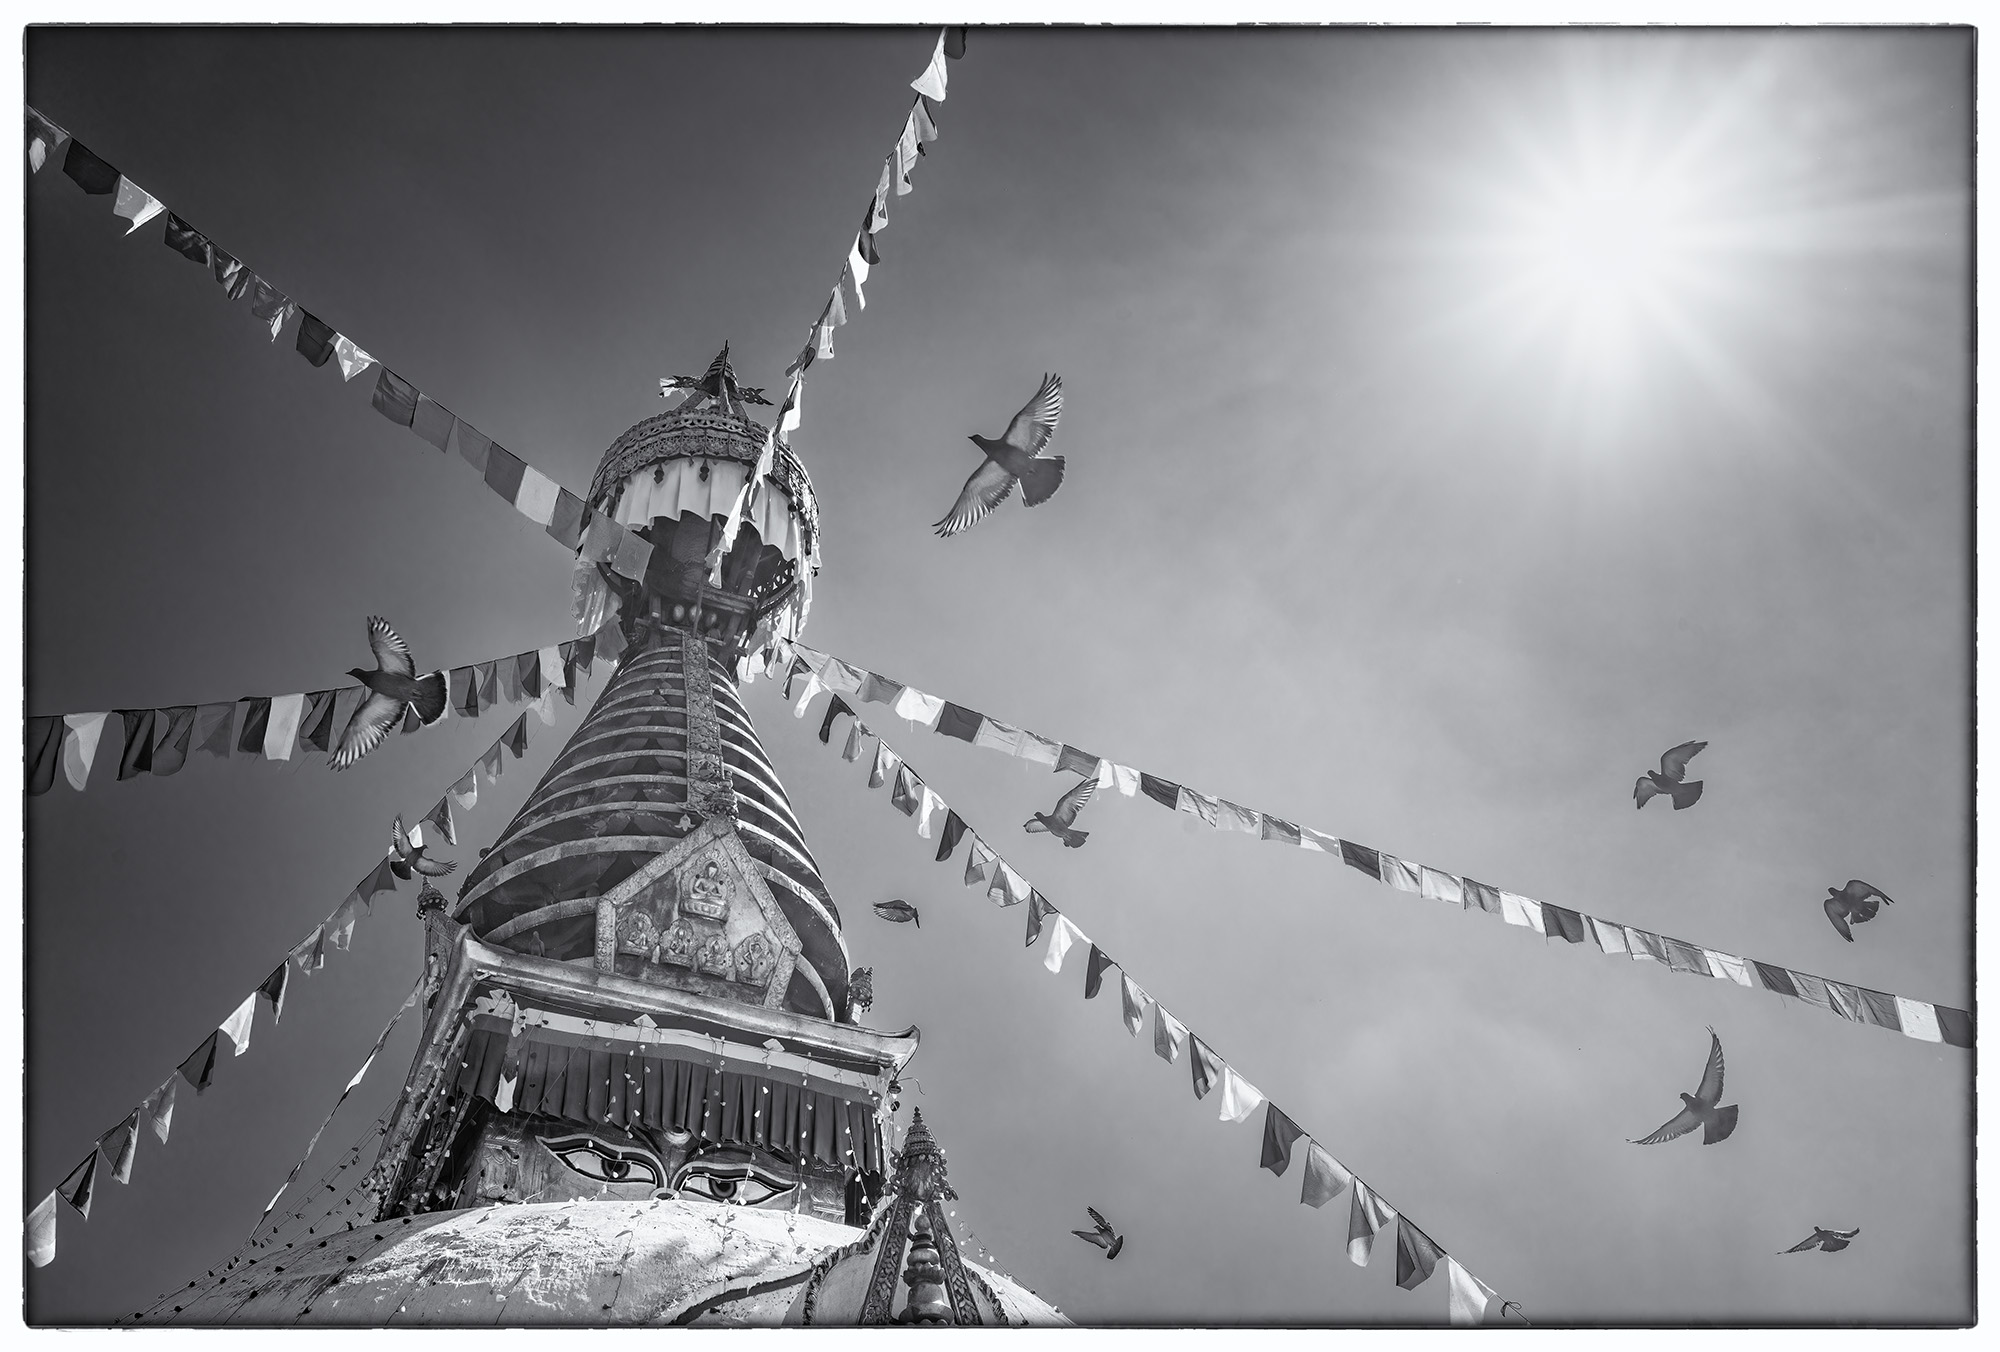 "Skyward Devotion" captures a profound moment at the Kirti Nihar Temple in Kathmandu, Nepal. The majestic main stupa stands tall...